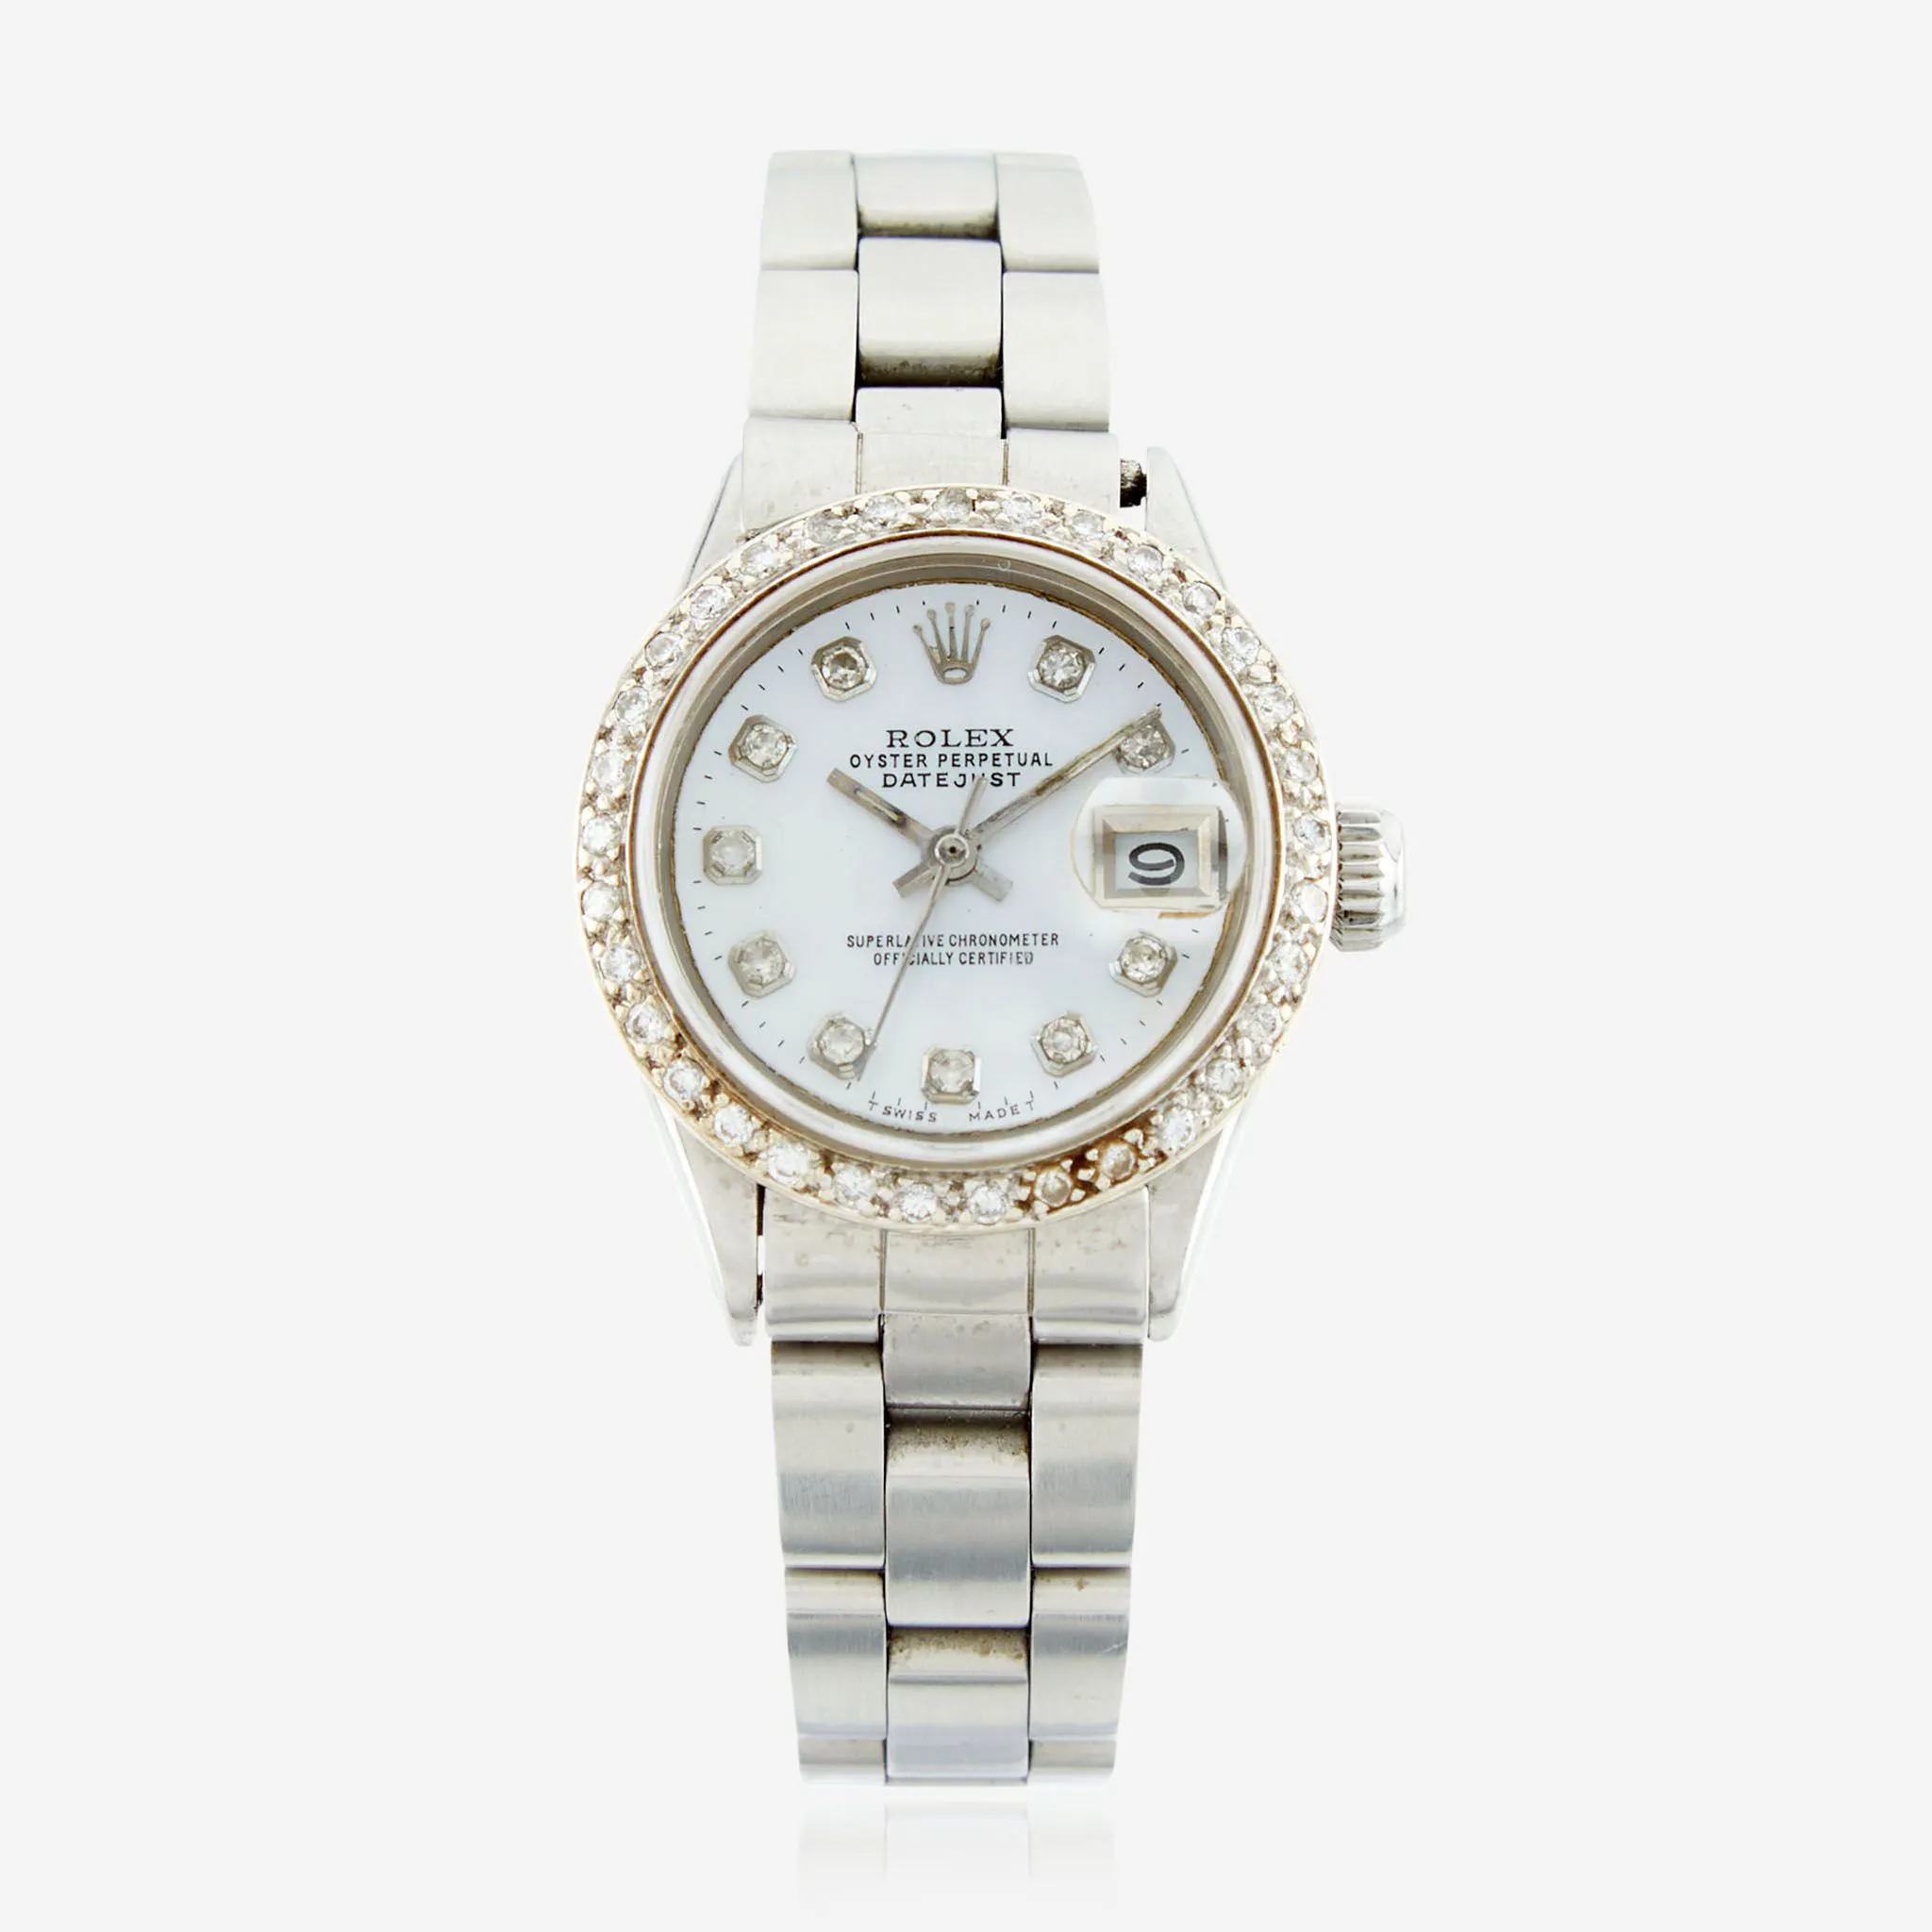 Rolex Oyster Perpetual Lady Date 6516 25mm Stainless steel and diamond-set Mother-of-pearl